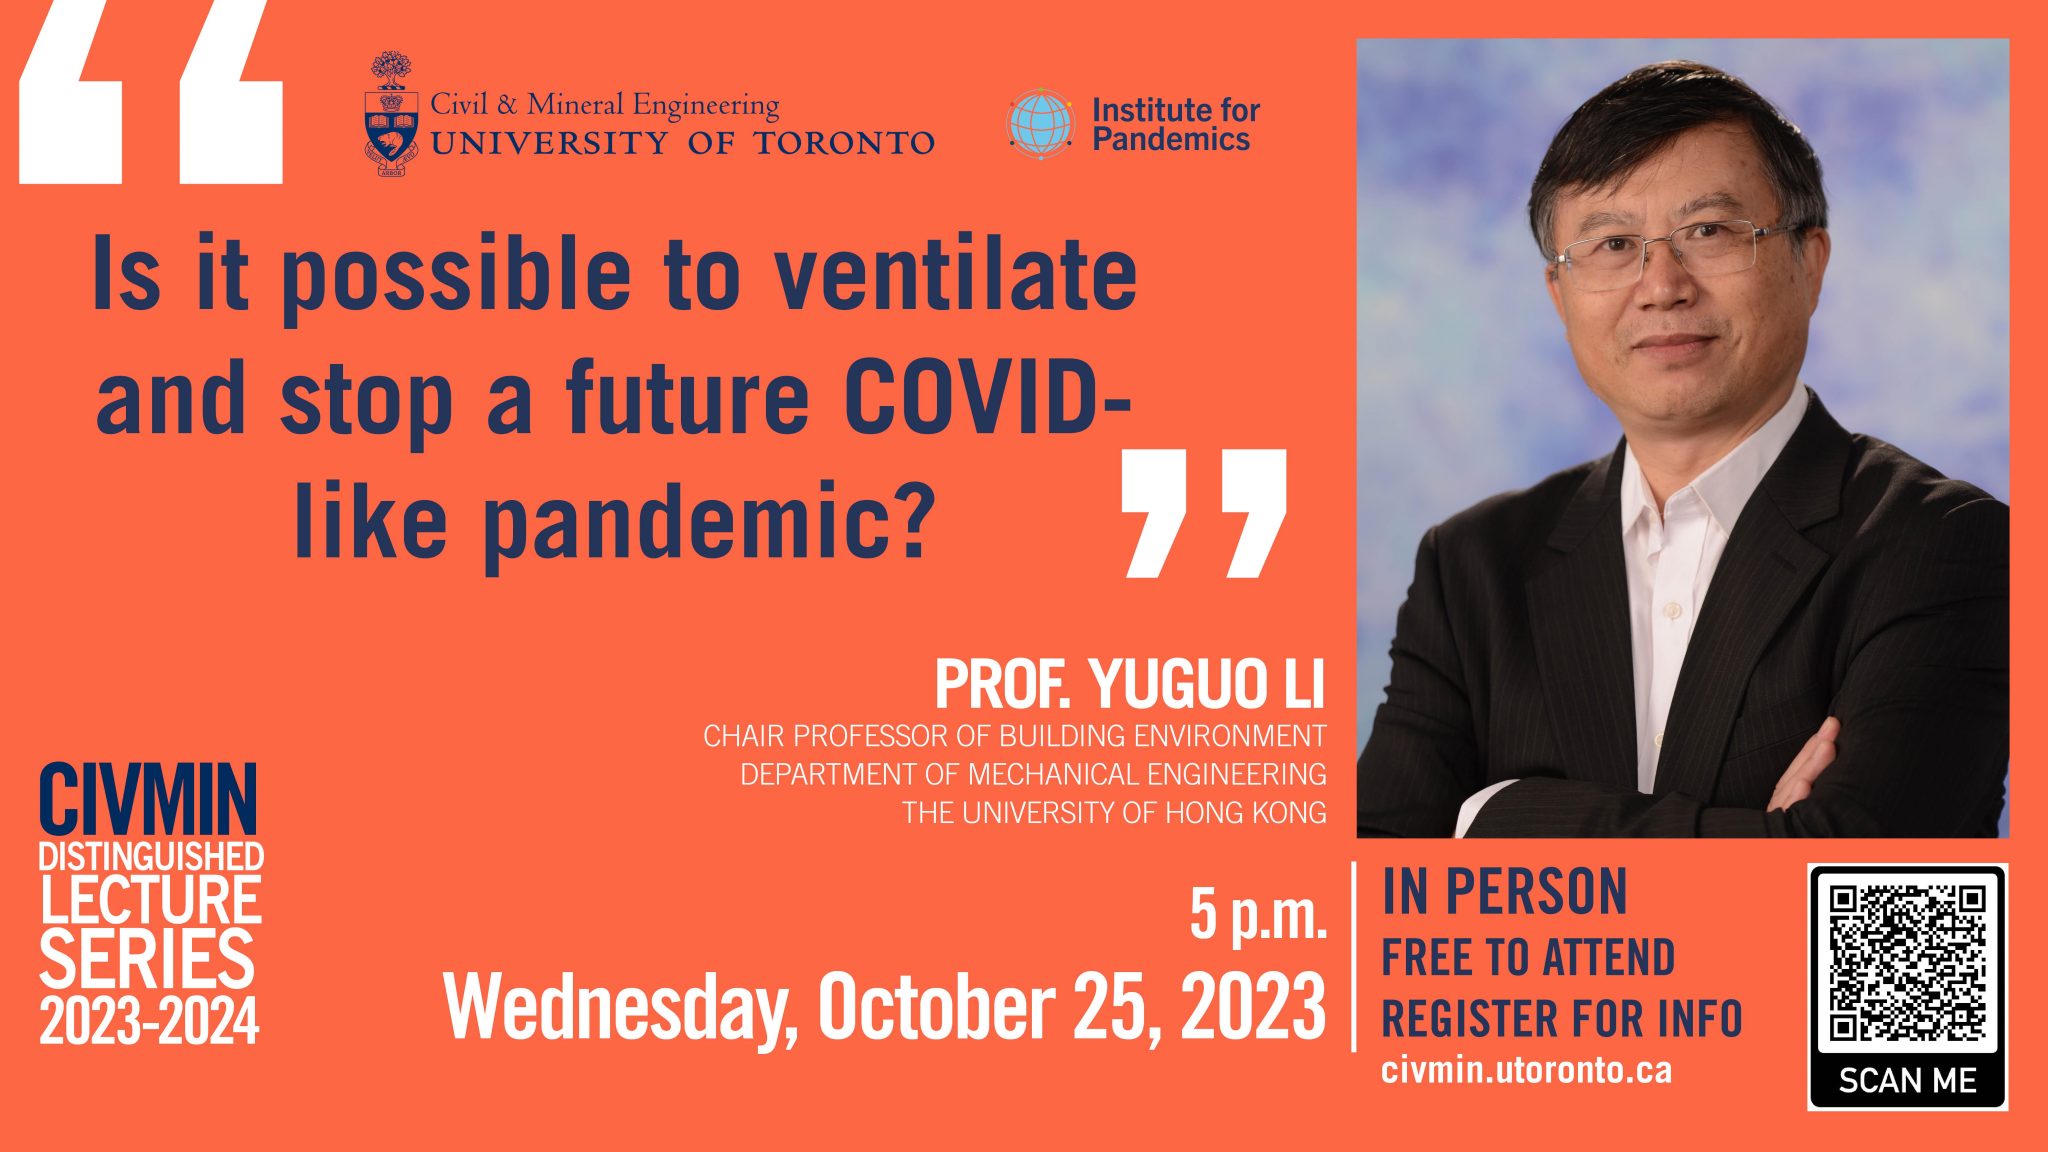 Is it possible to ventilate and stop a future COVID-like pandemic?